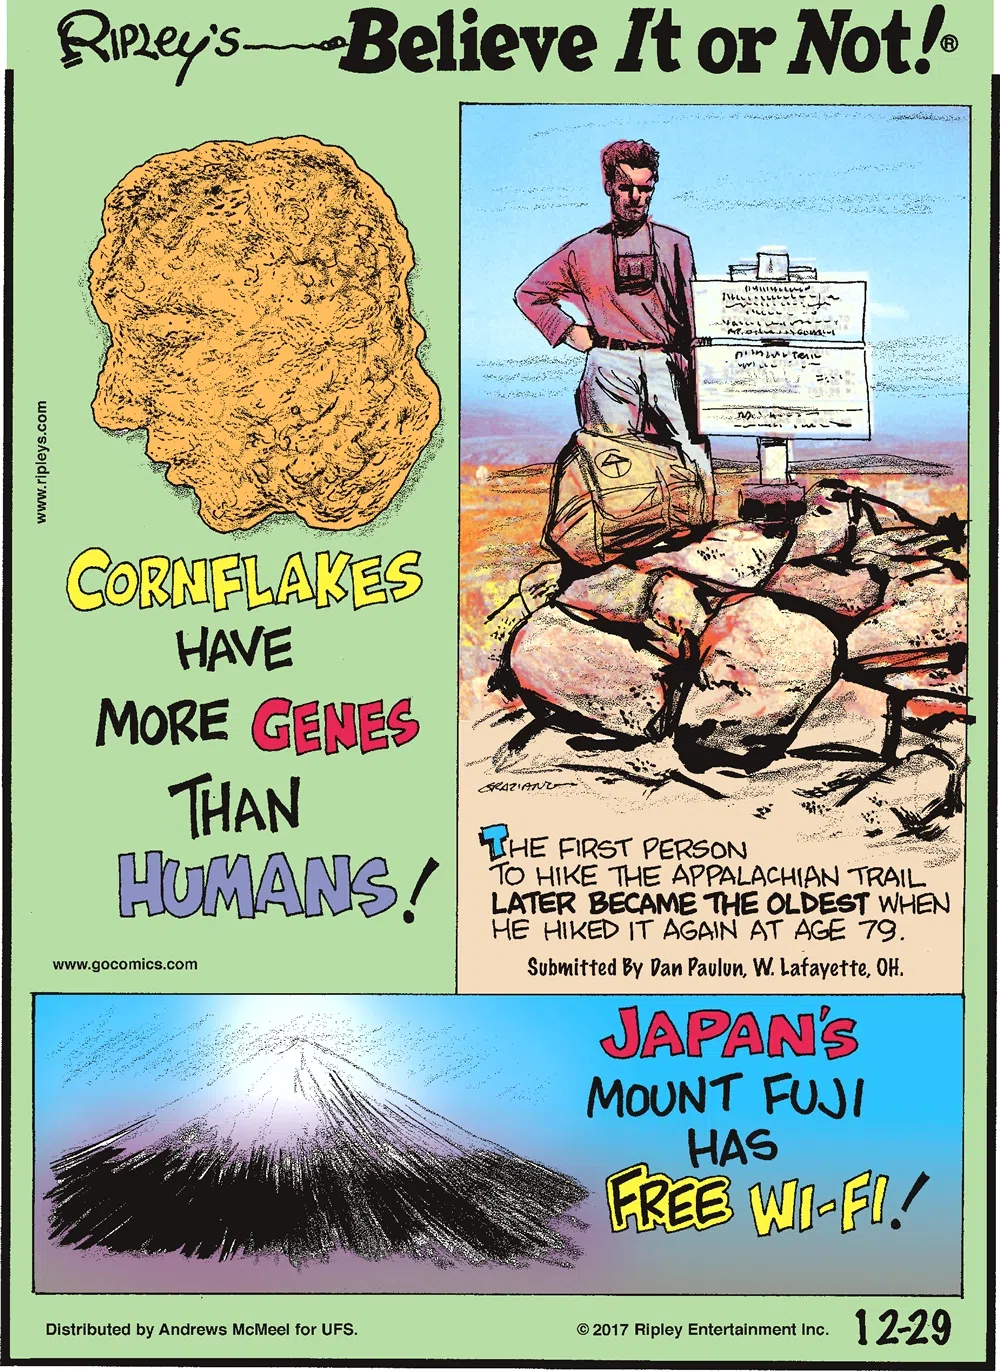 Cornflakes have more genes than humans!-------------------- The first person to hike the Appalachian trail later became the oldest when he hiked it again at age 79. Submitted by Dan Paulun, W. Lafayette, OH.-------------------- Japan's Mount Fuji has free wi-fi!